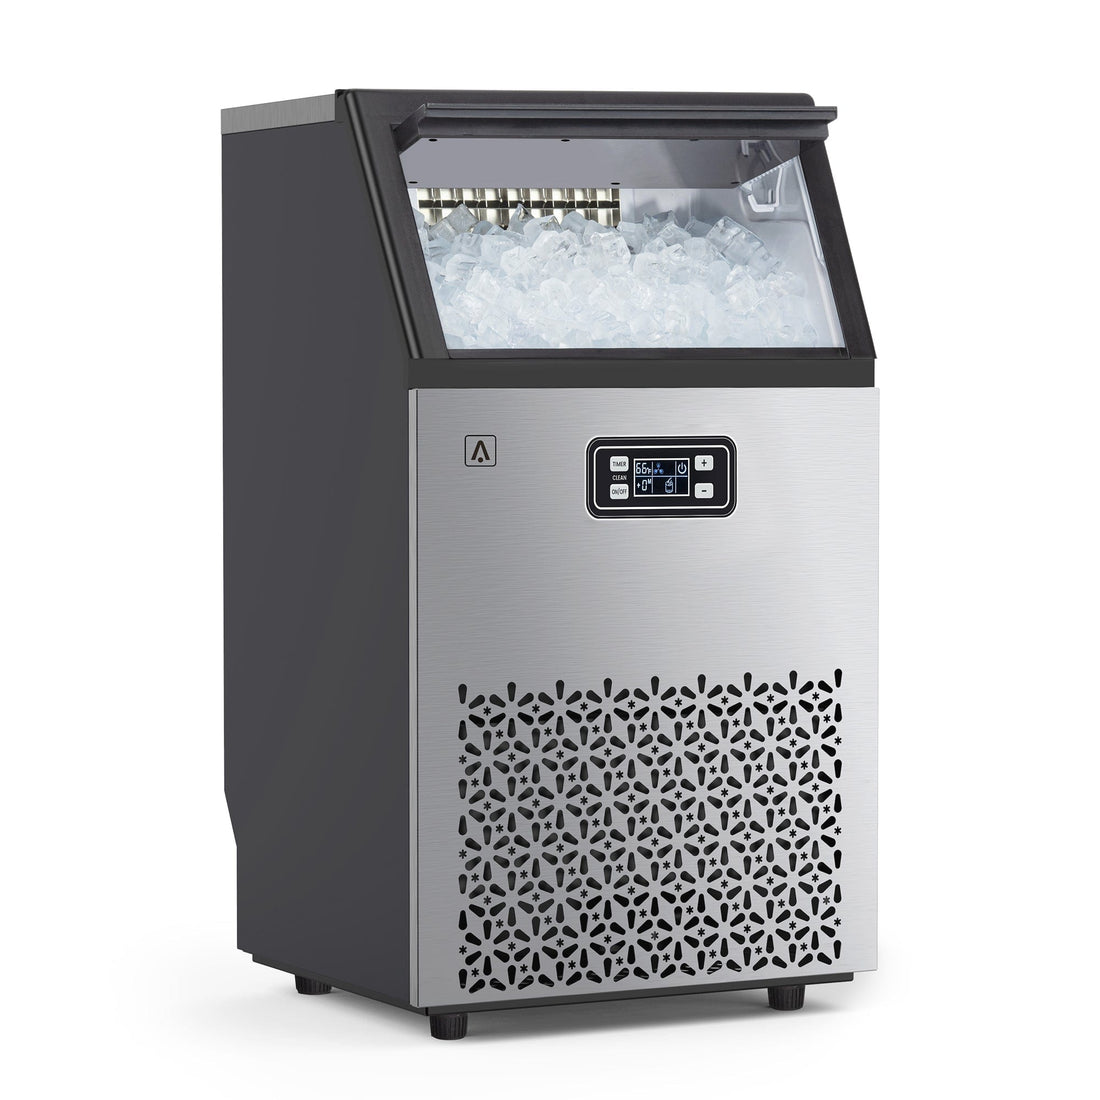 GARVEE 100lbs/24H Commercial Ice Maker Machine with 33LBS Ice Bin Stainless Steel Freestanding Self-Cleaning for Restaurant Bars Home and Offices